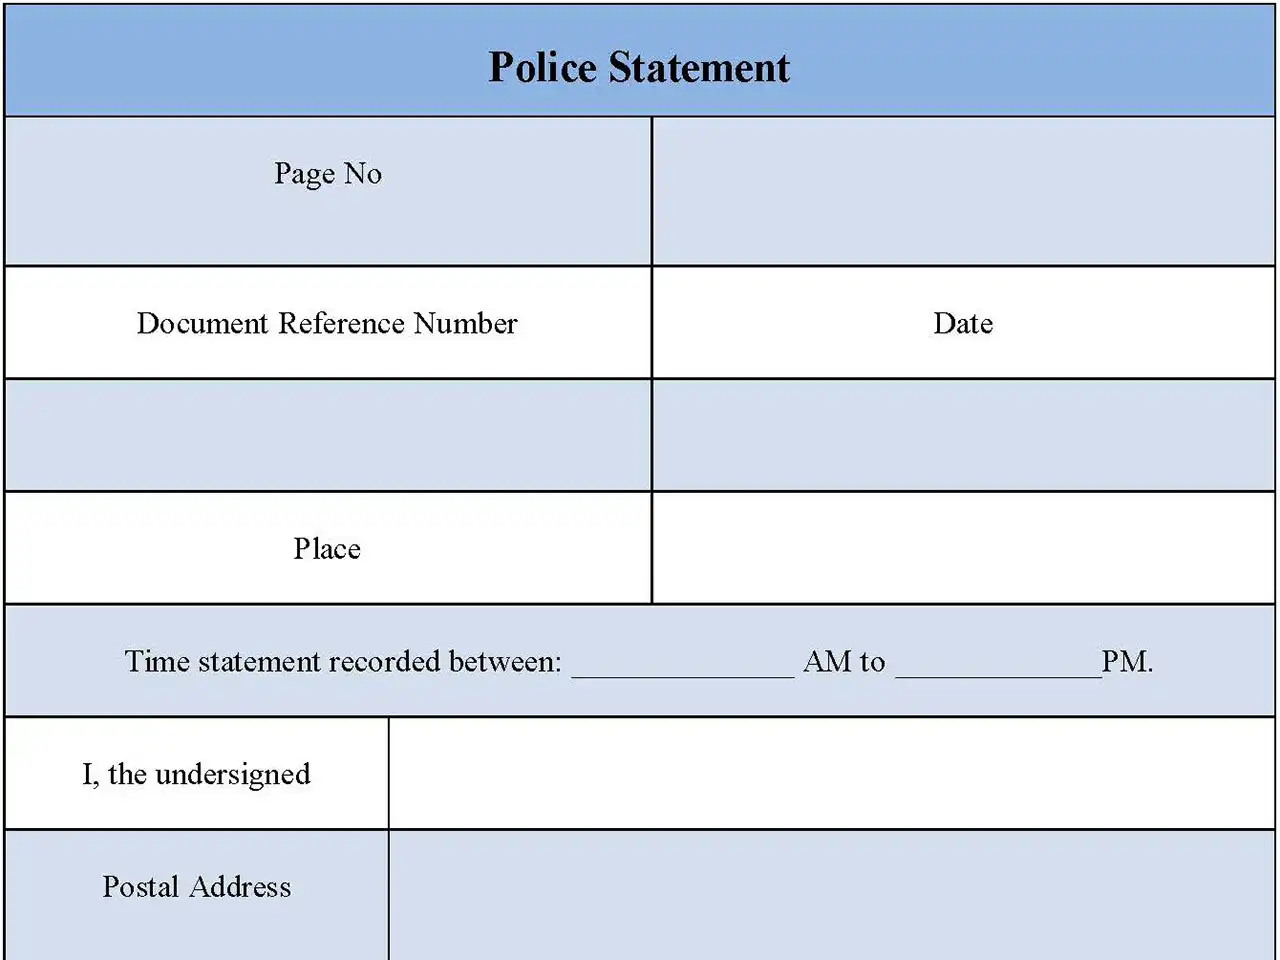 Police Statement Fillable PDF Form And Word Document